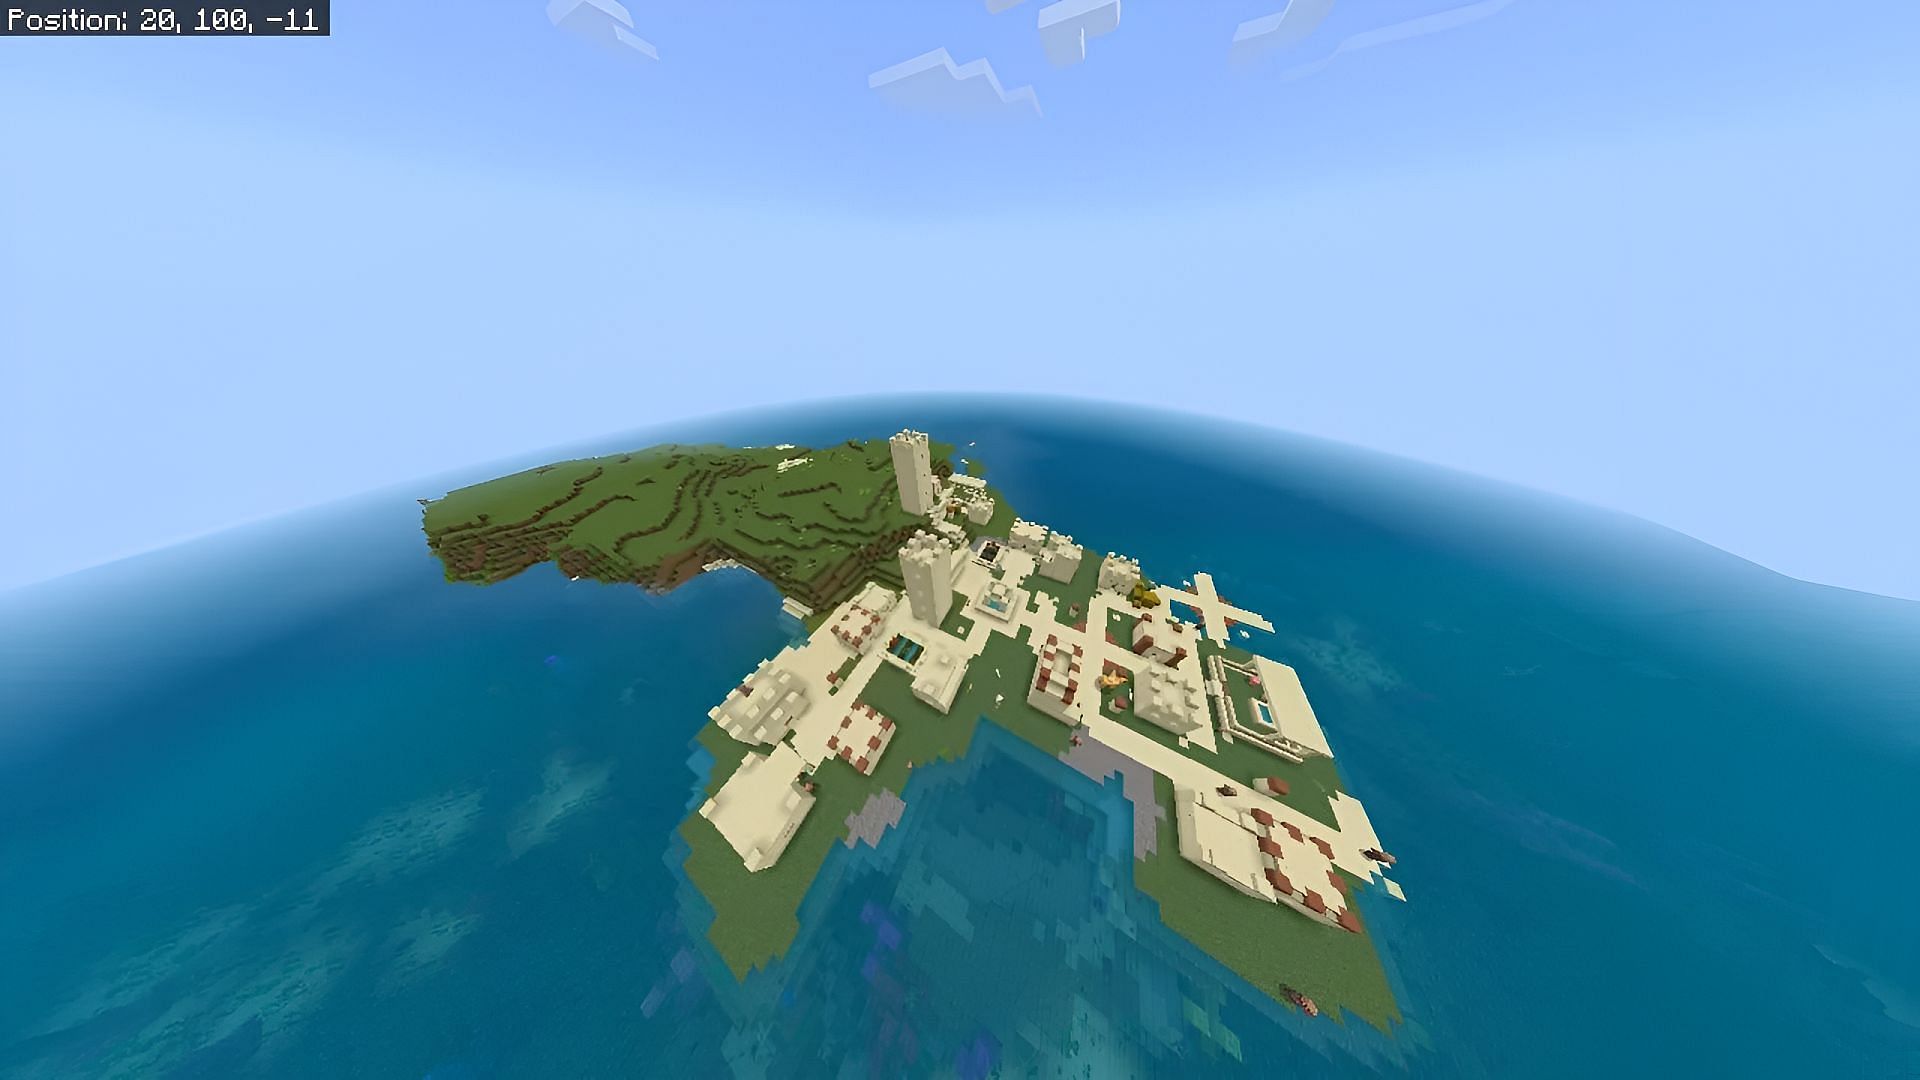 This Minecraft seed&#039;s spawn village is a little out of sorts (Image via Fragrant_Result_186/Reddit)